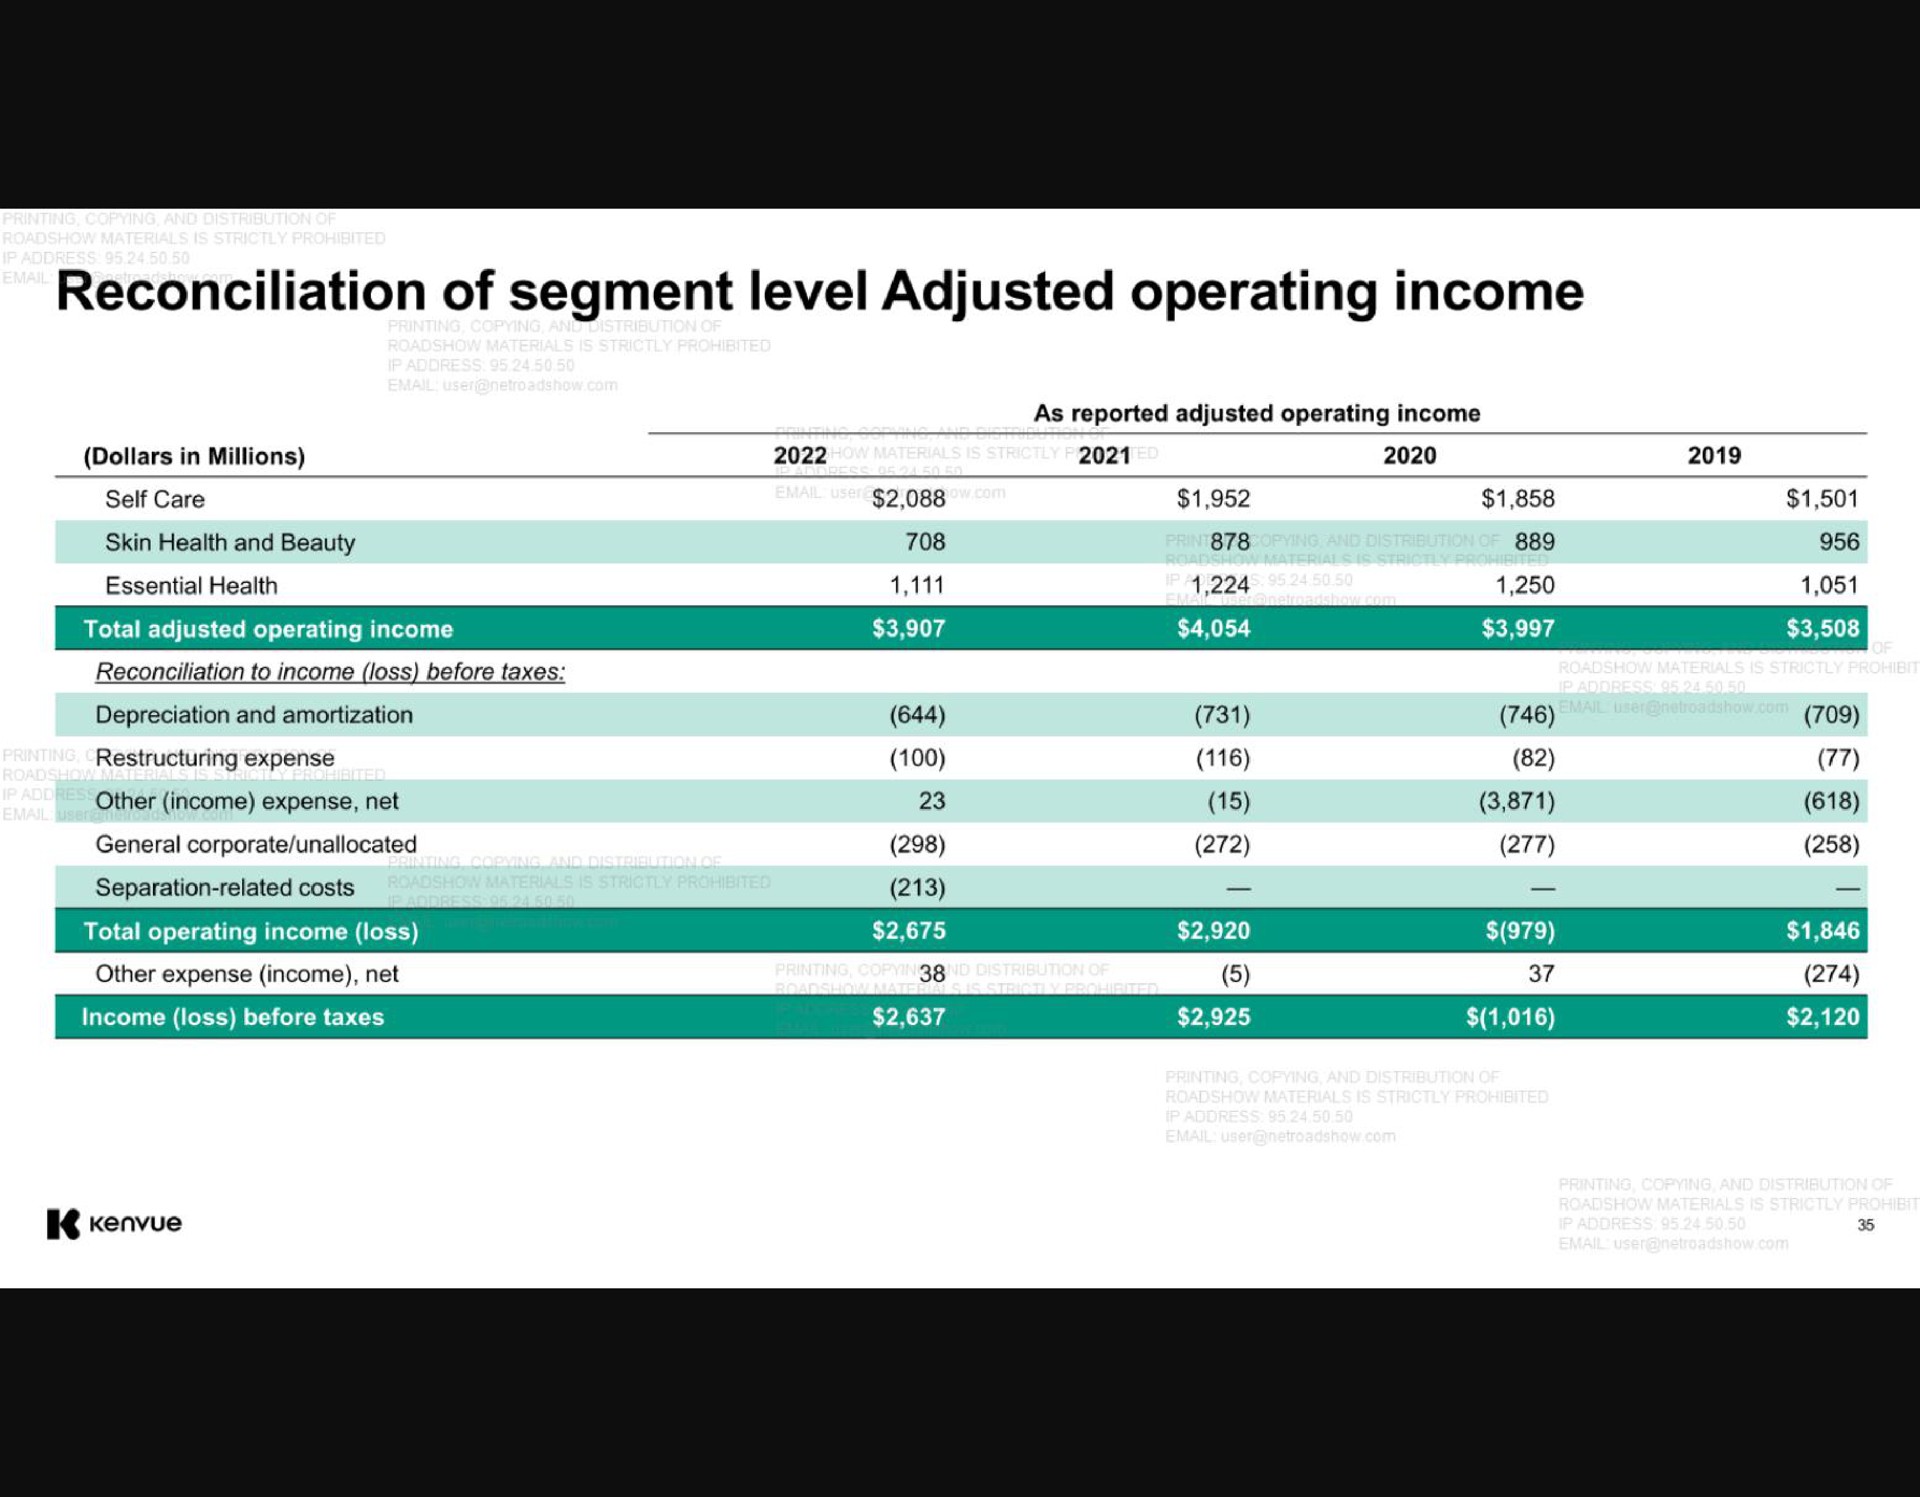 reconciliation of segment level adjusted operating income | Kenvue